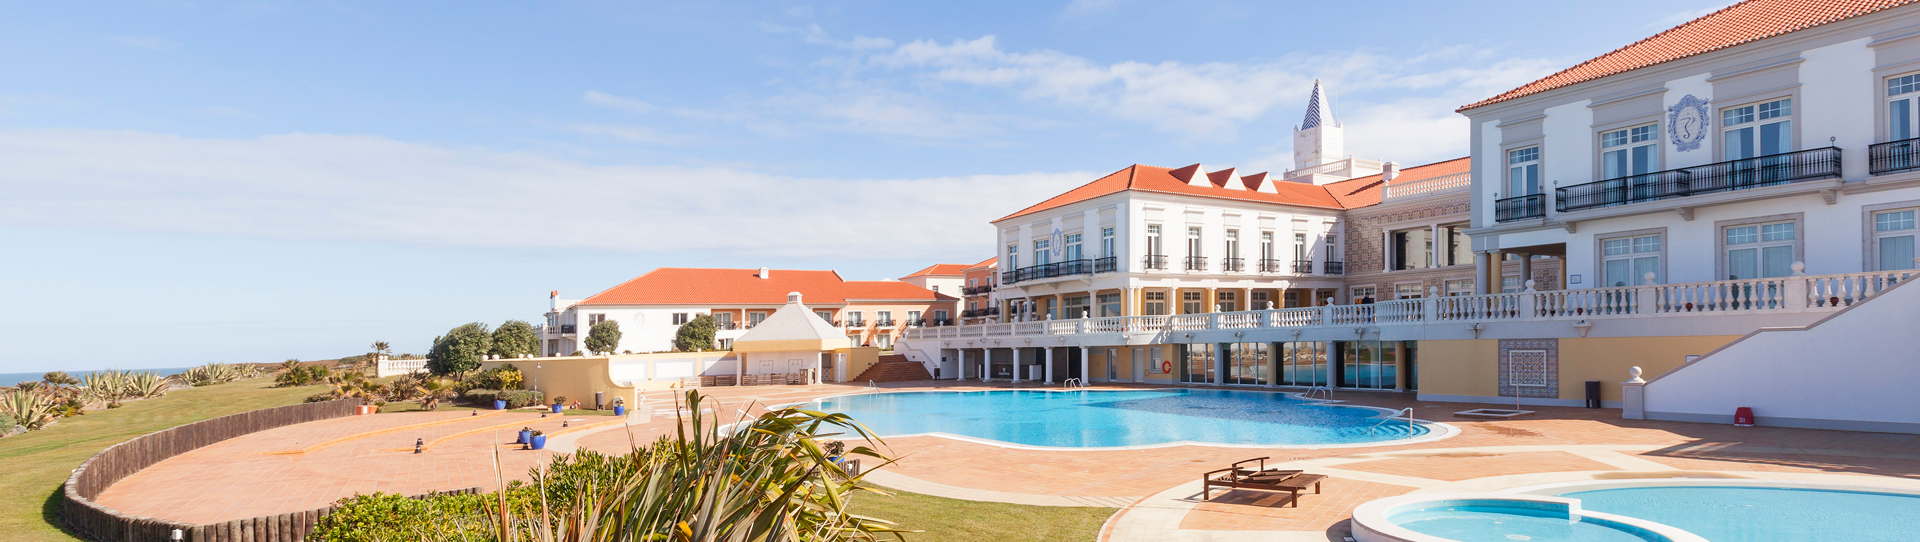 Portugal golf holidays - 4 Nights BB & 3 Golf Rounds<br>Silver Coast Golf Package - Photo 1